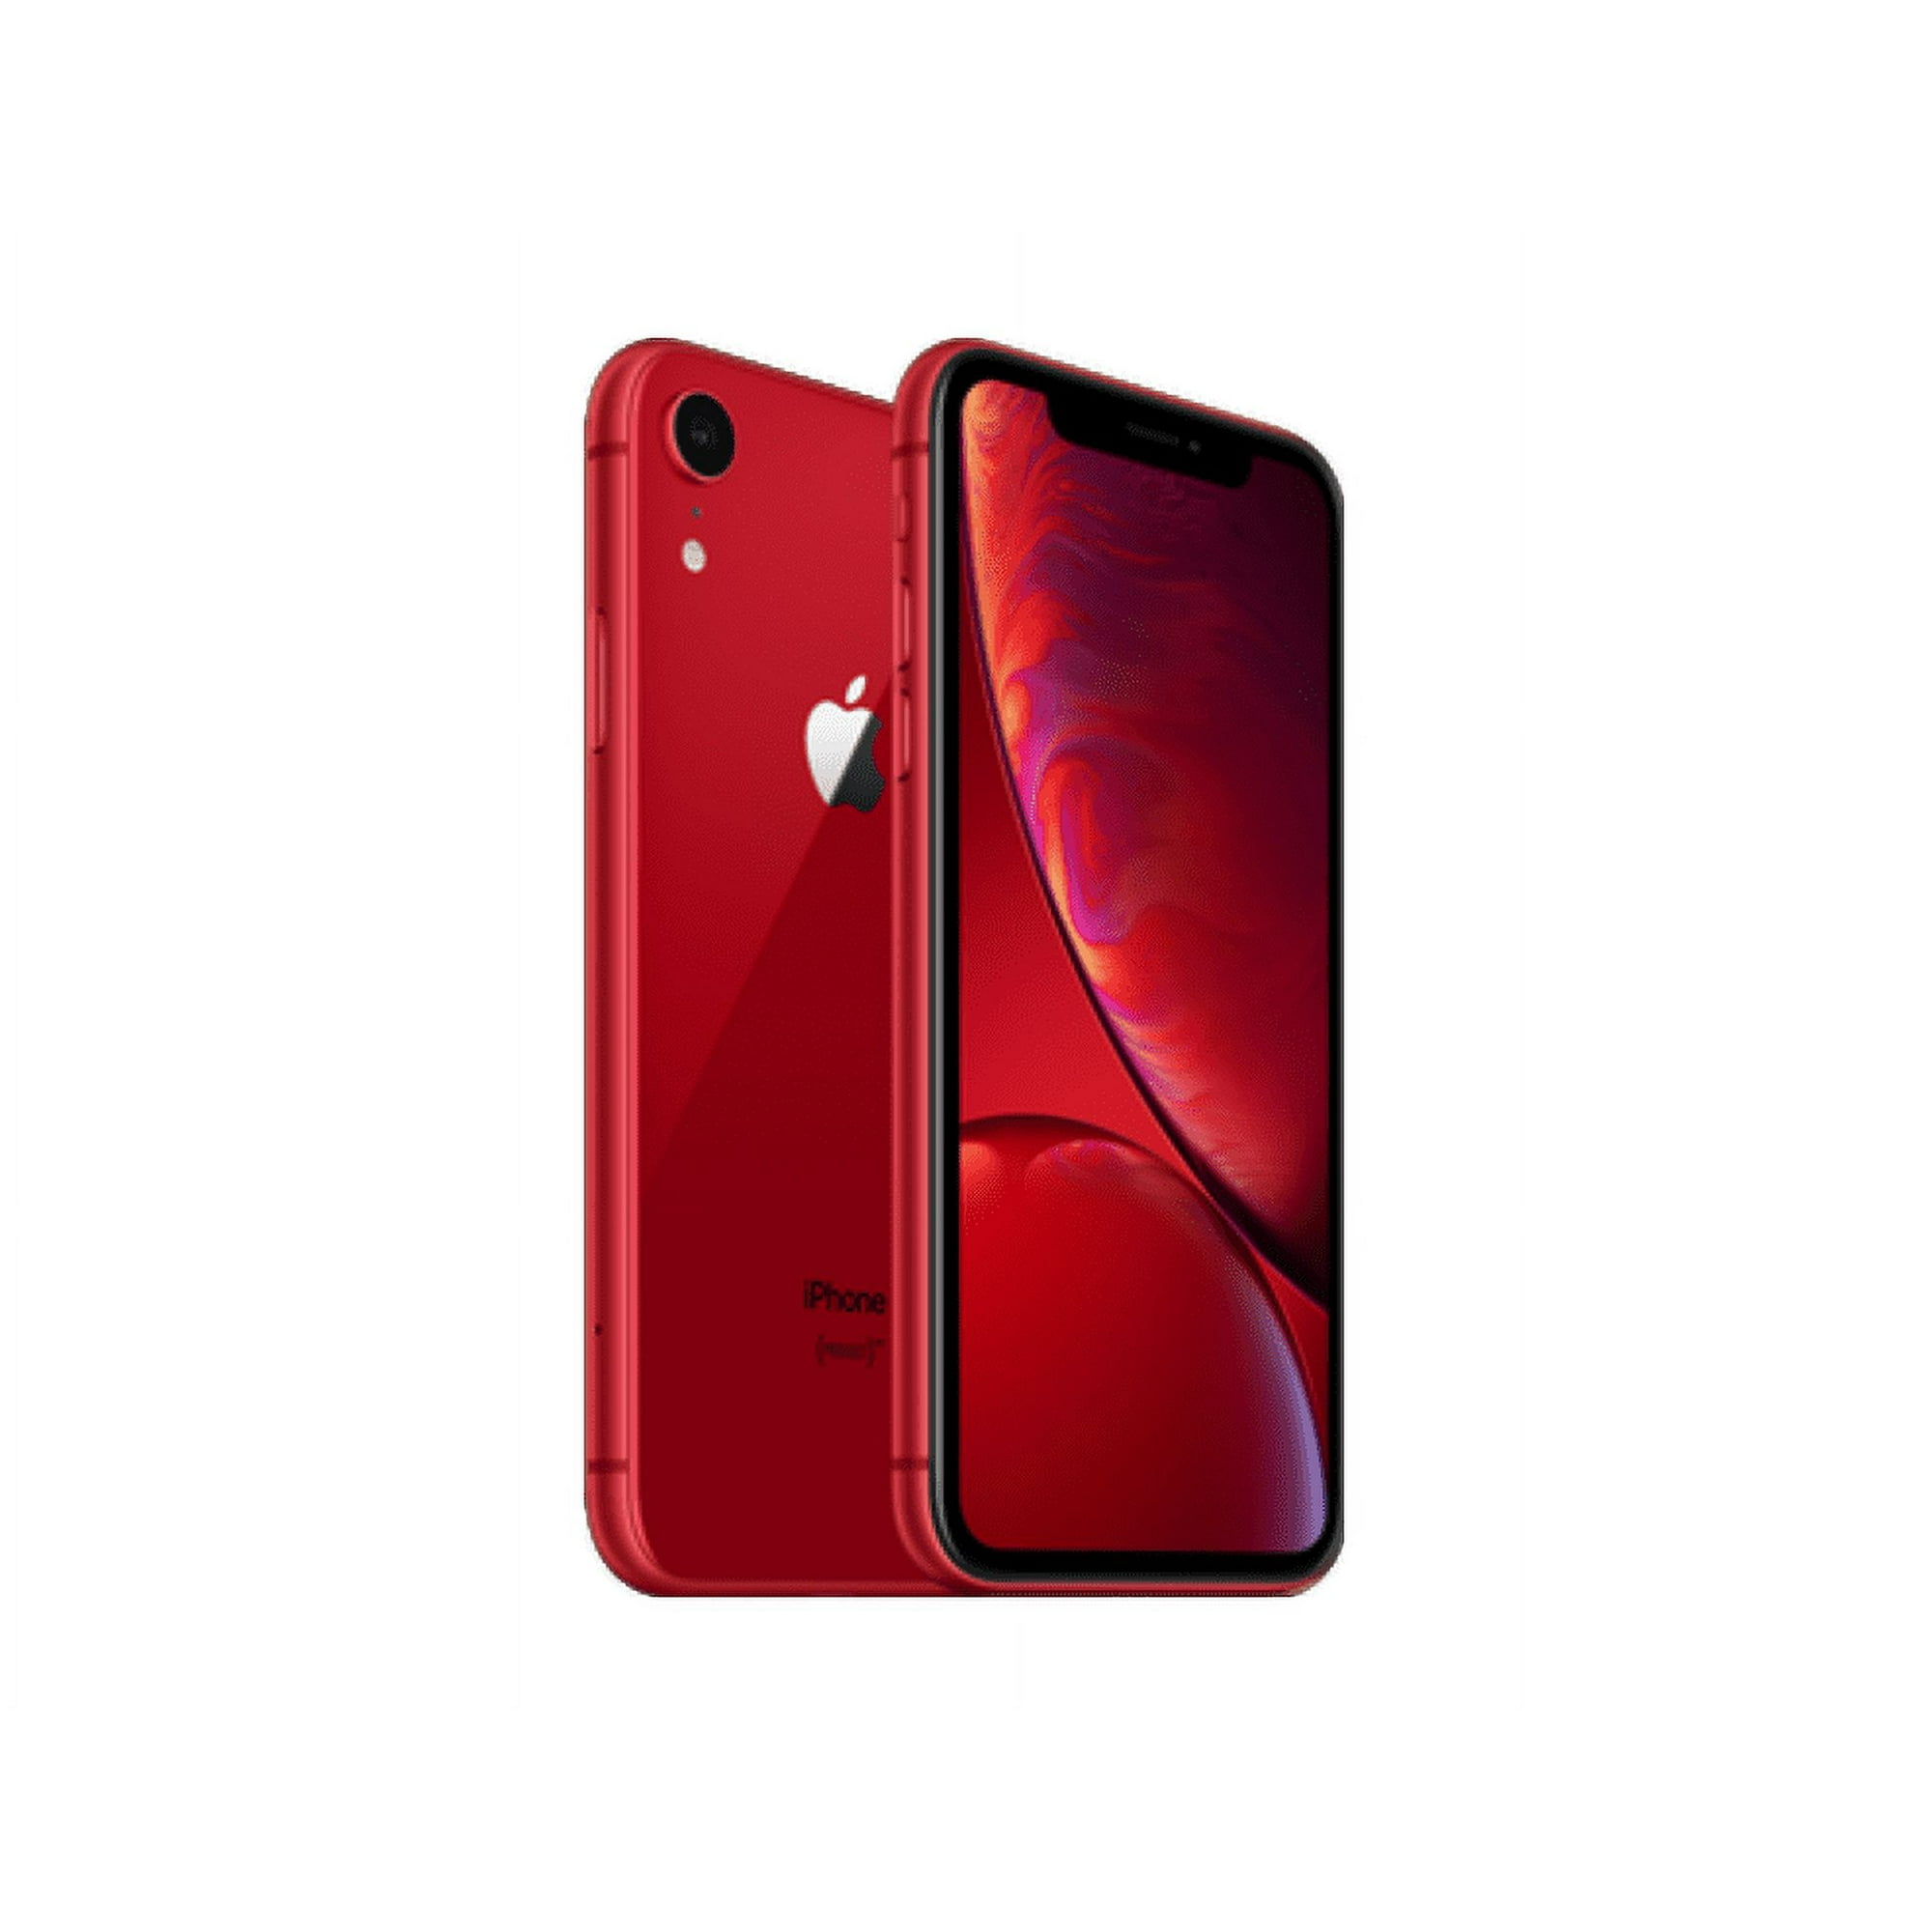 iPhone XR PRODUCT RED 64GB